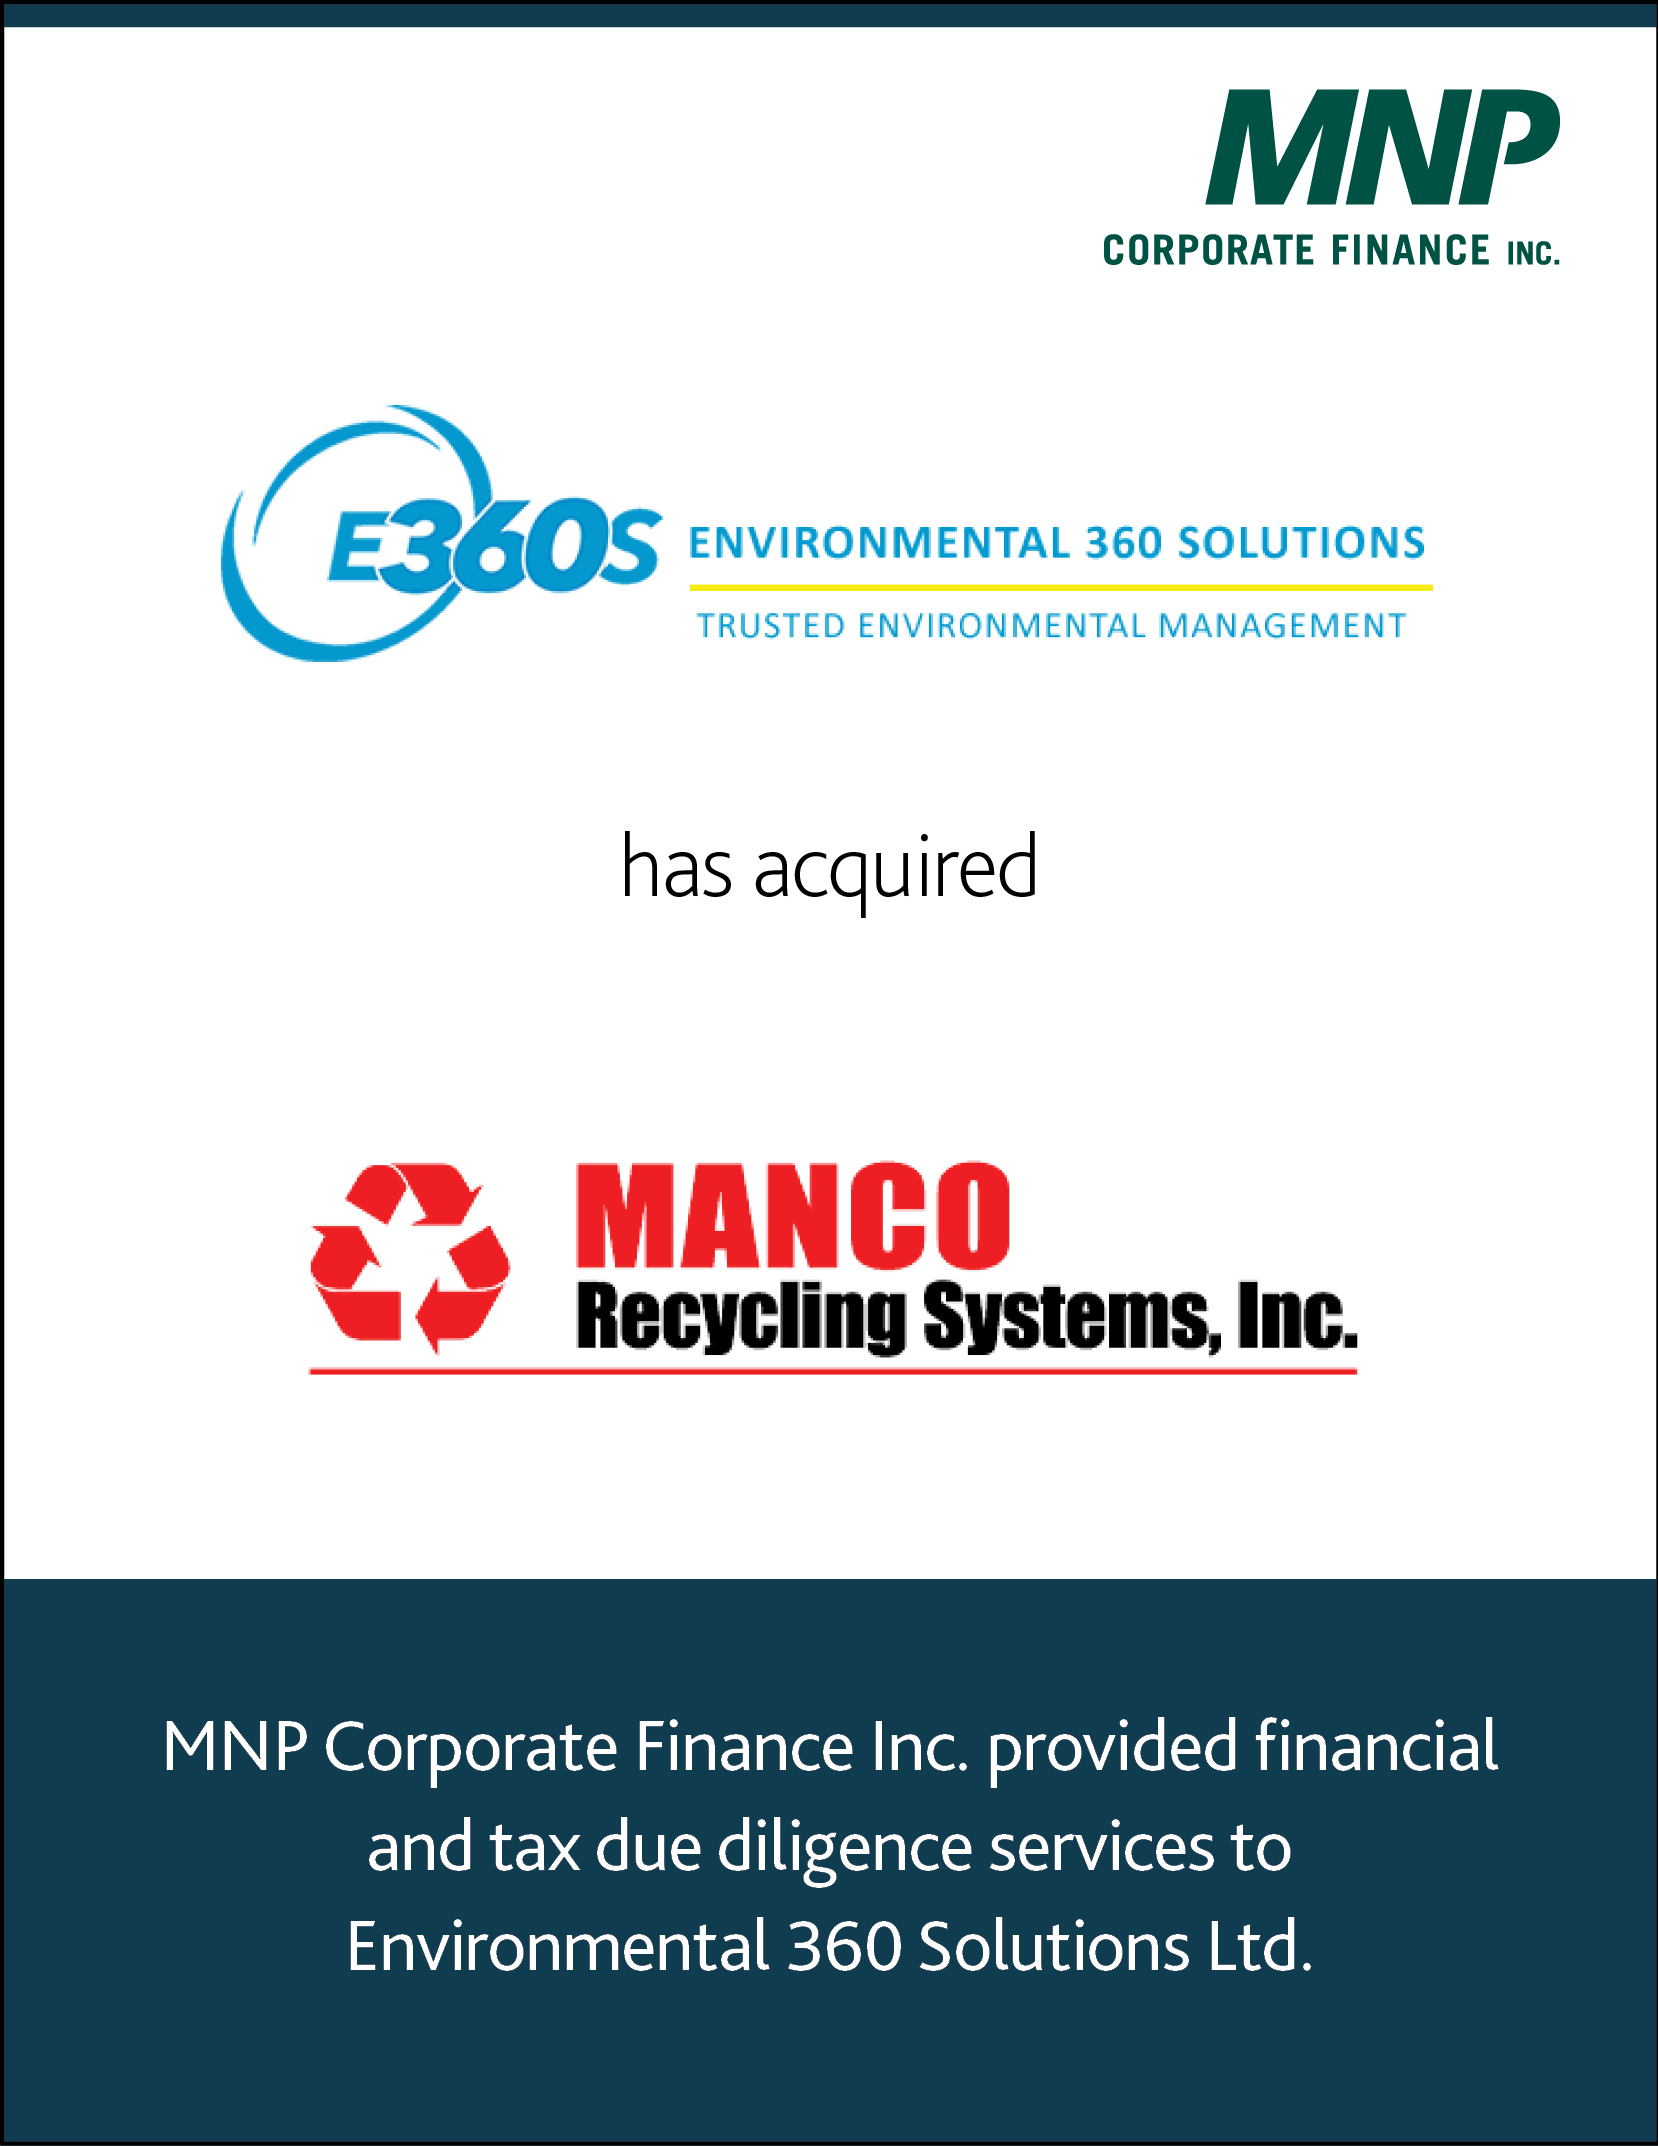 Environmental 360 solutions has acquired Manco Recycling systems inc